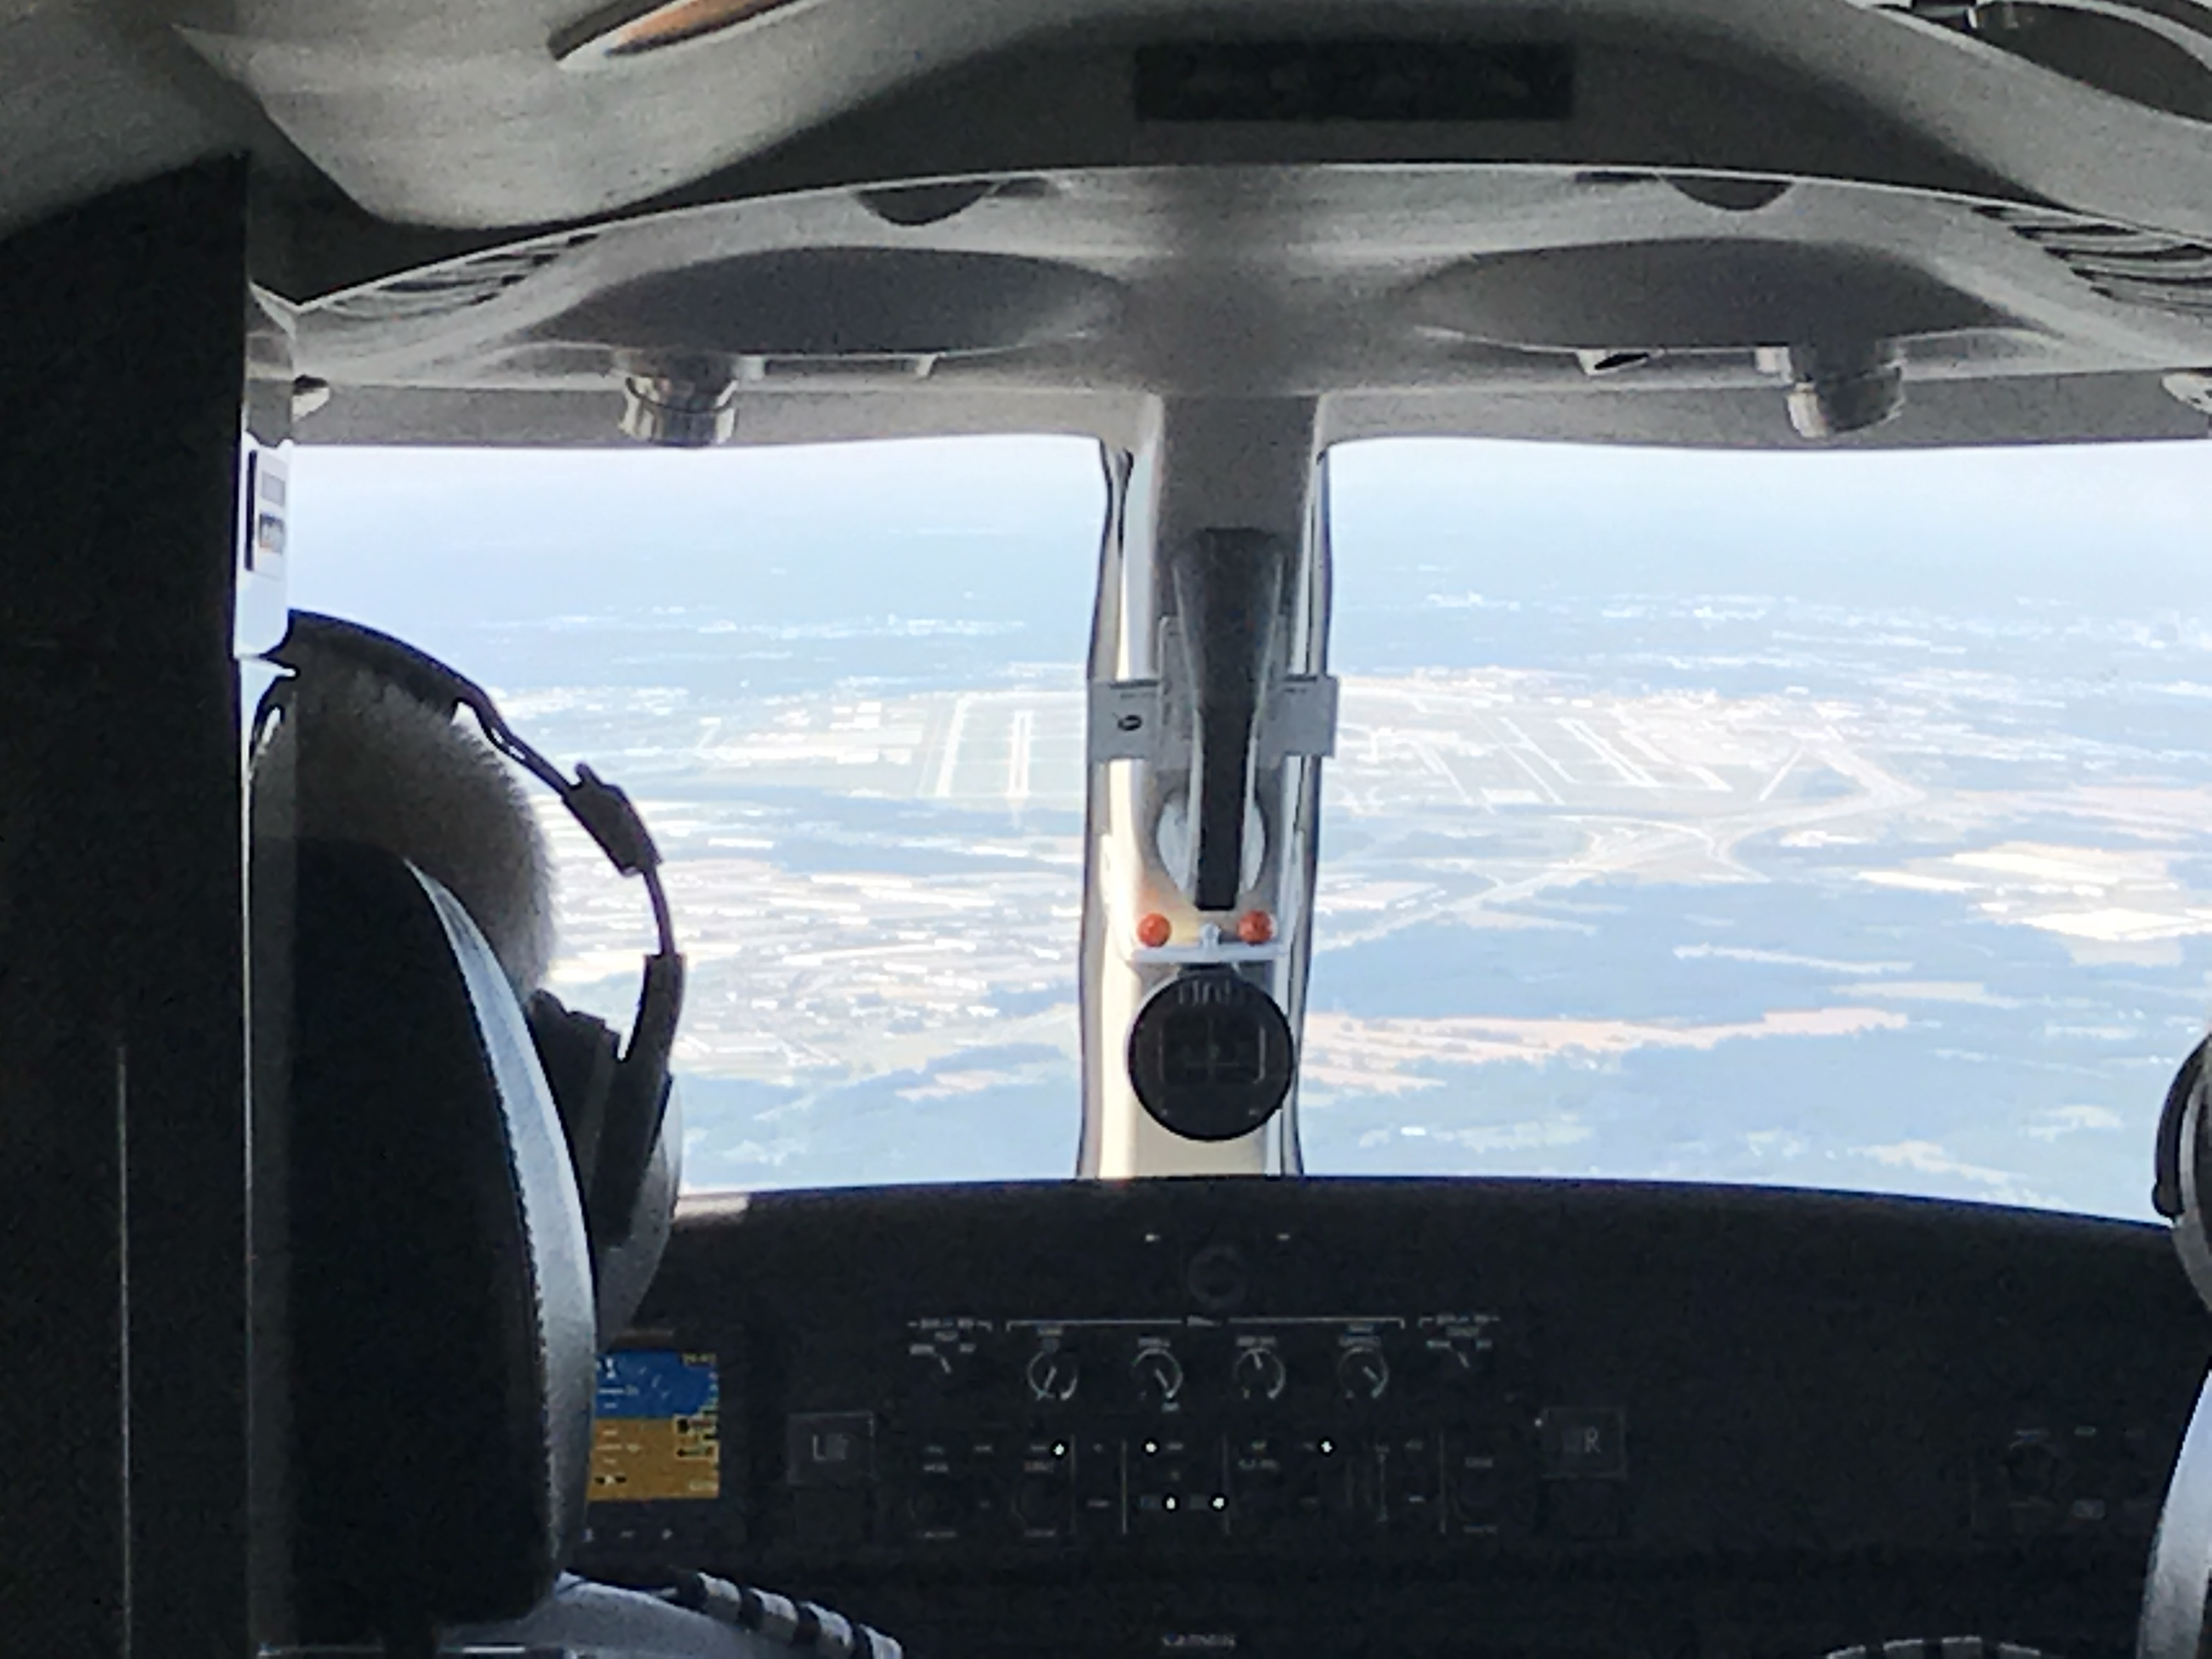 View of Indianapolis International Airport on approach